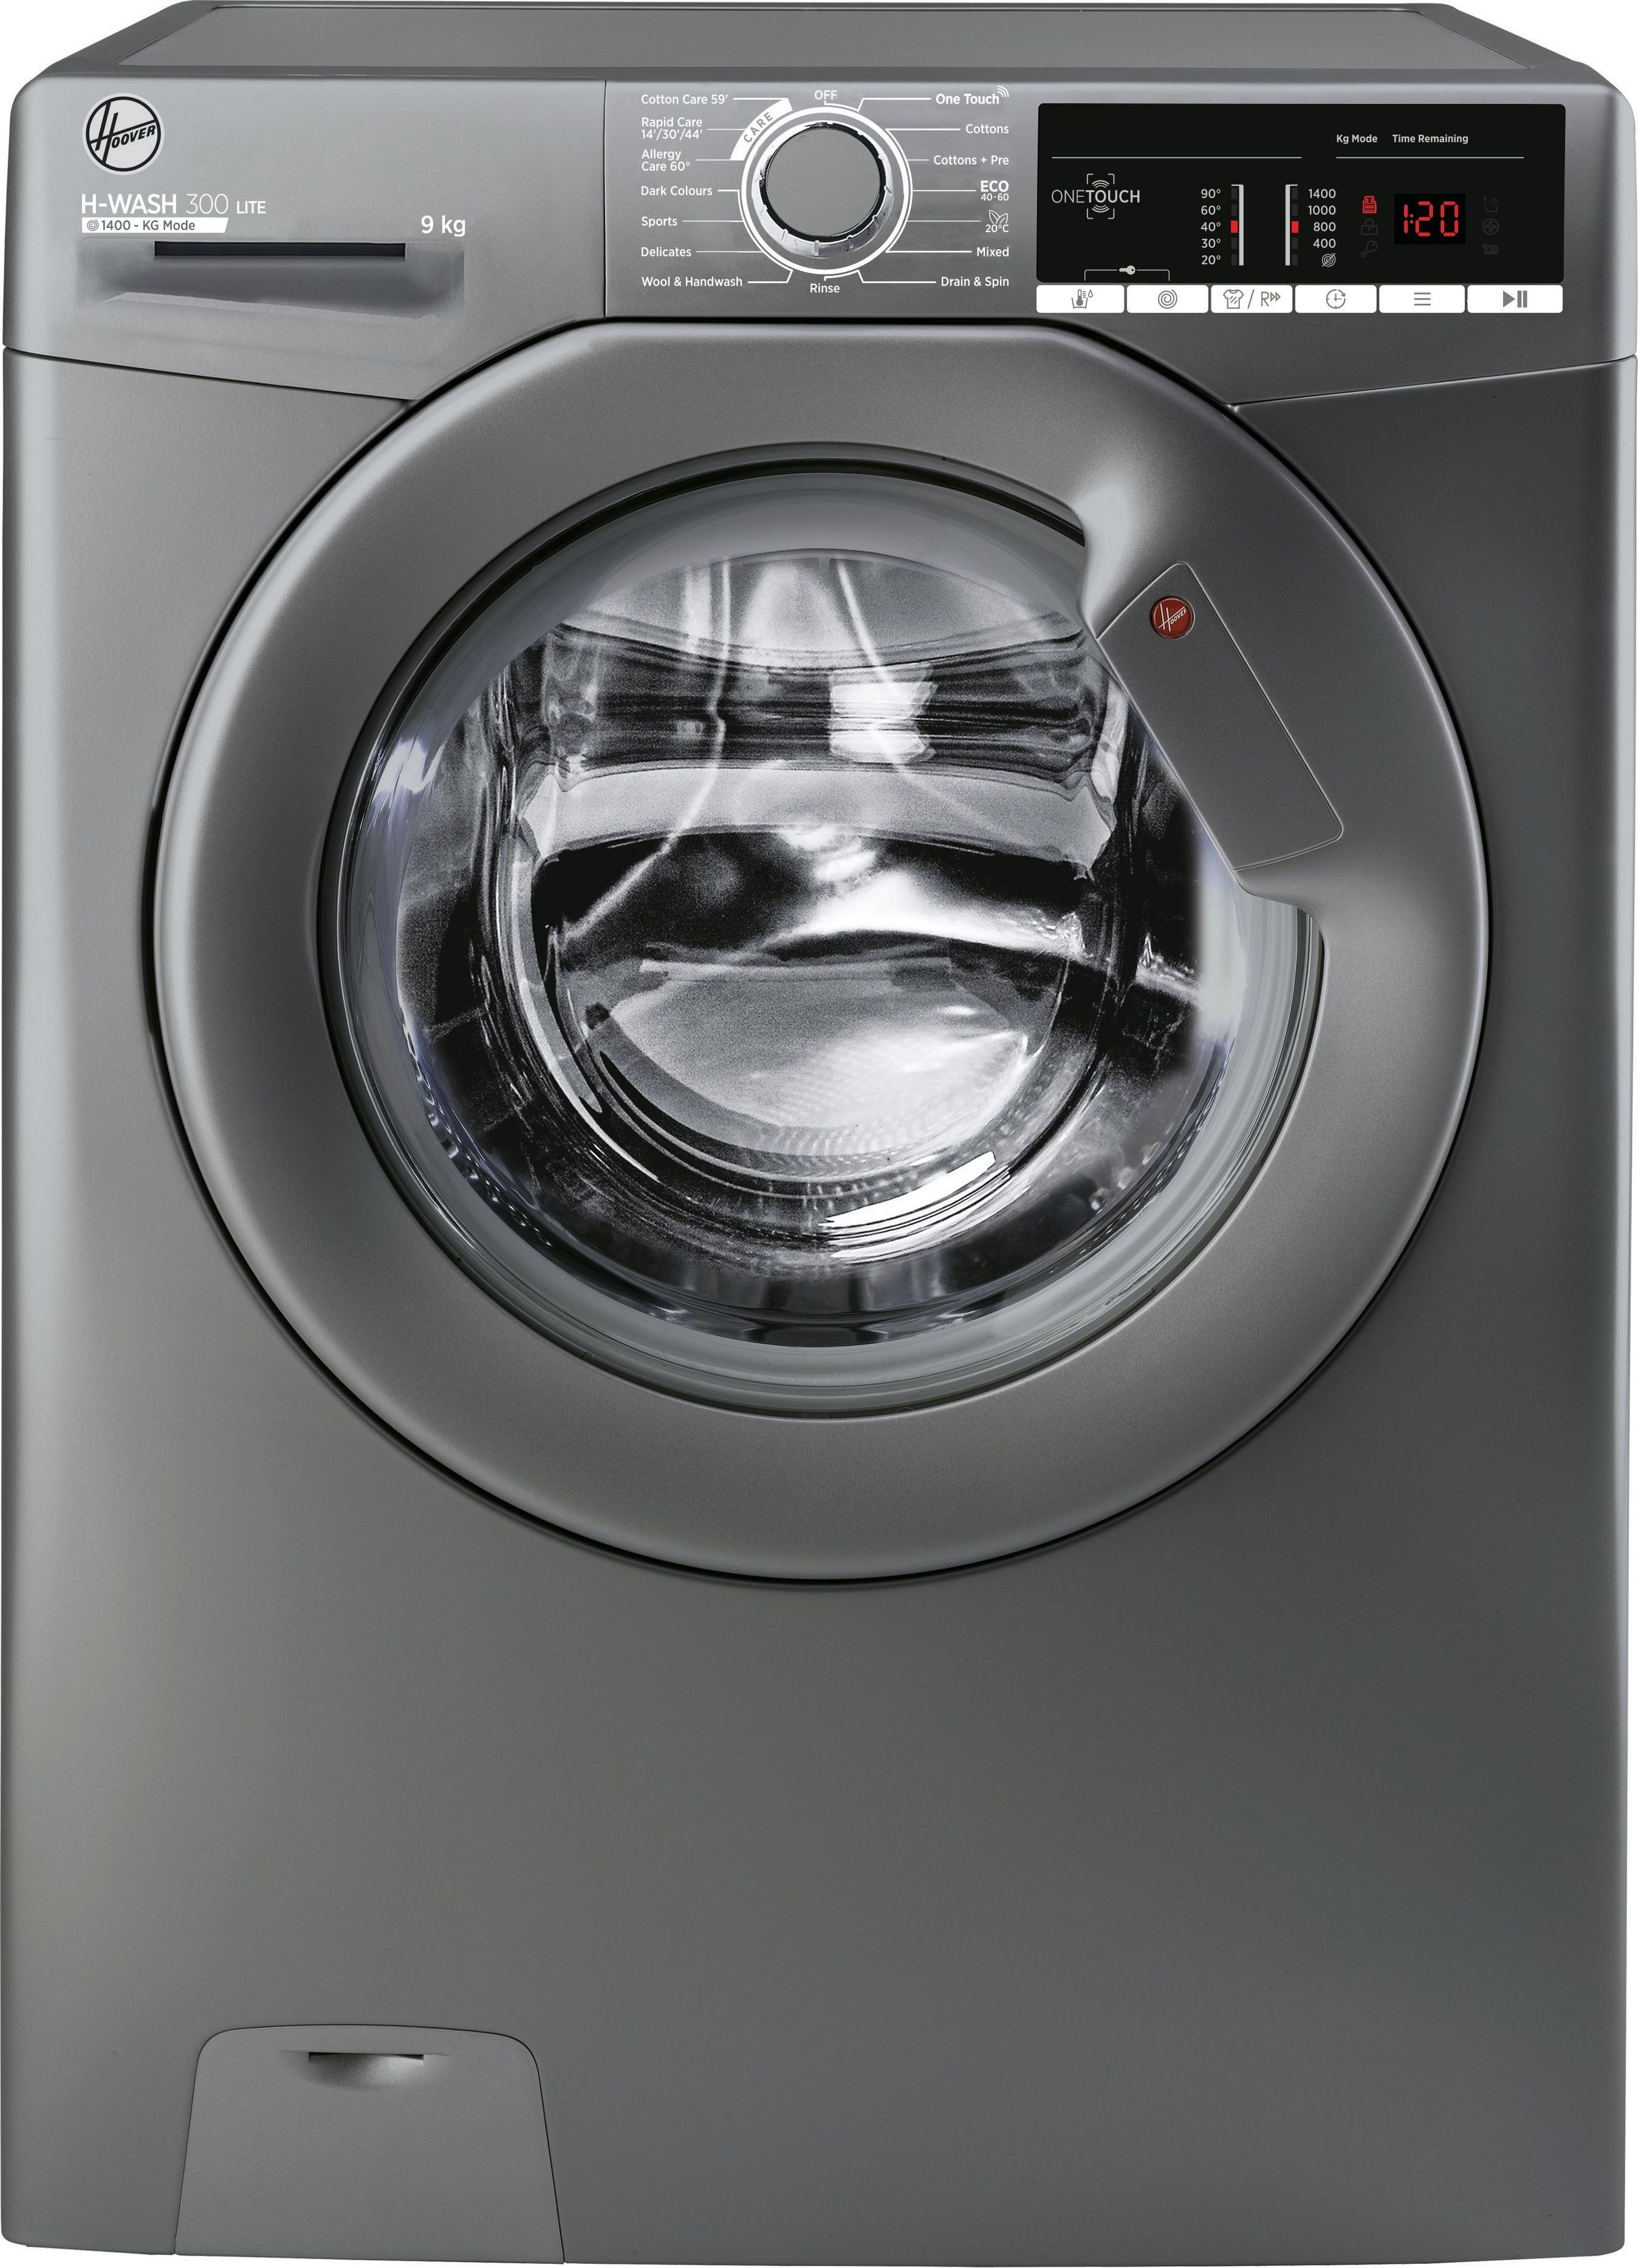 Hoover H-WASH 300 LITE H3W49TAGG41-80 9kg Washing Machine with 1400 rpm - Graphite - B Rated Silver